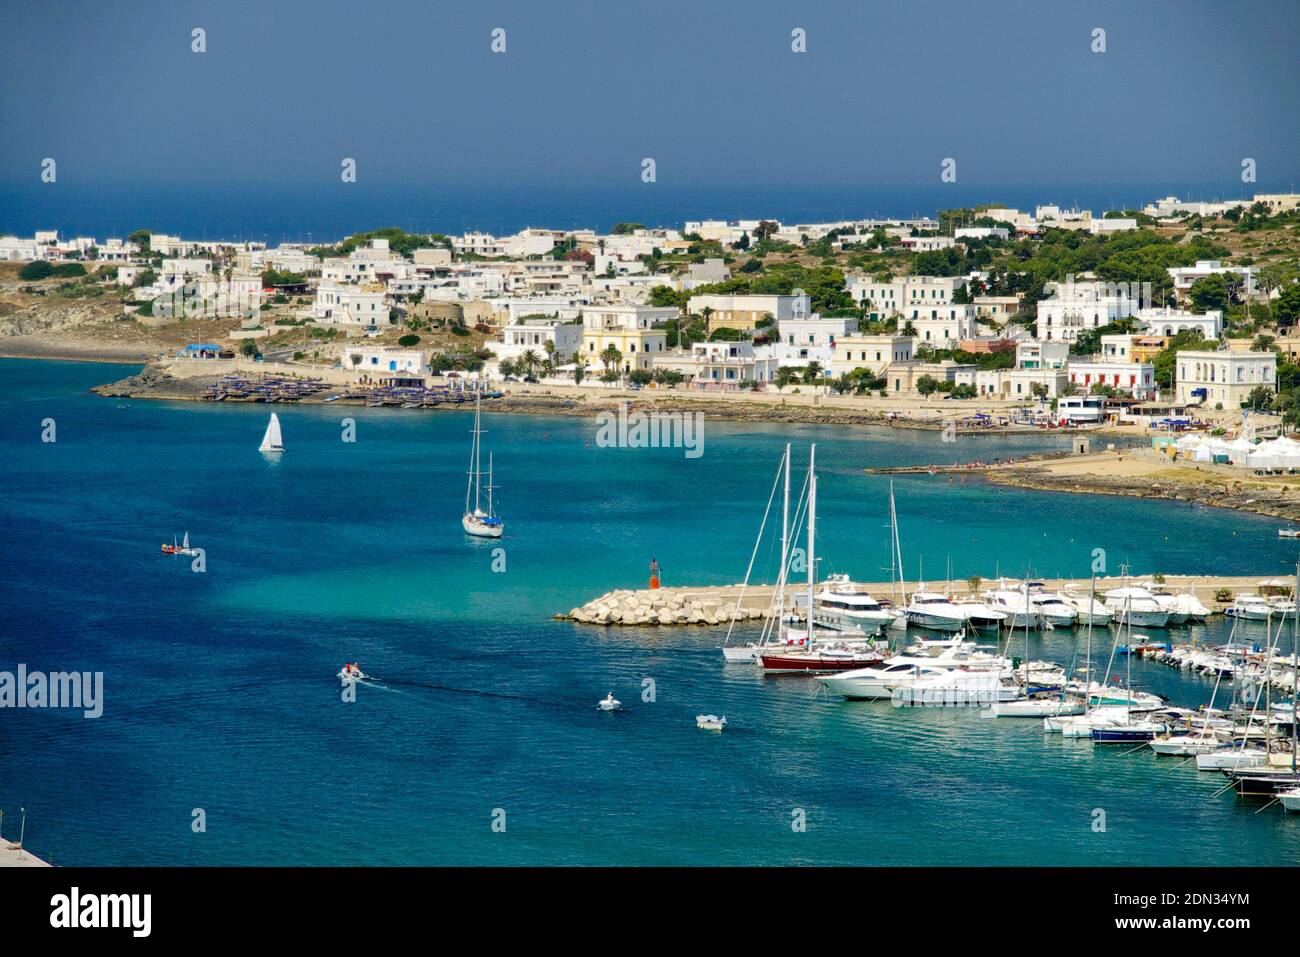 Sailboats In Sea Against Buildings In City Stock Photo